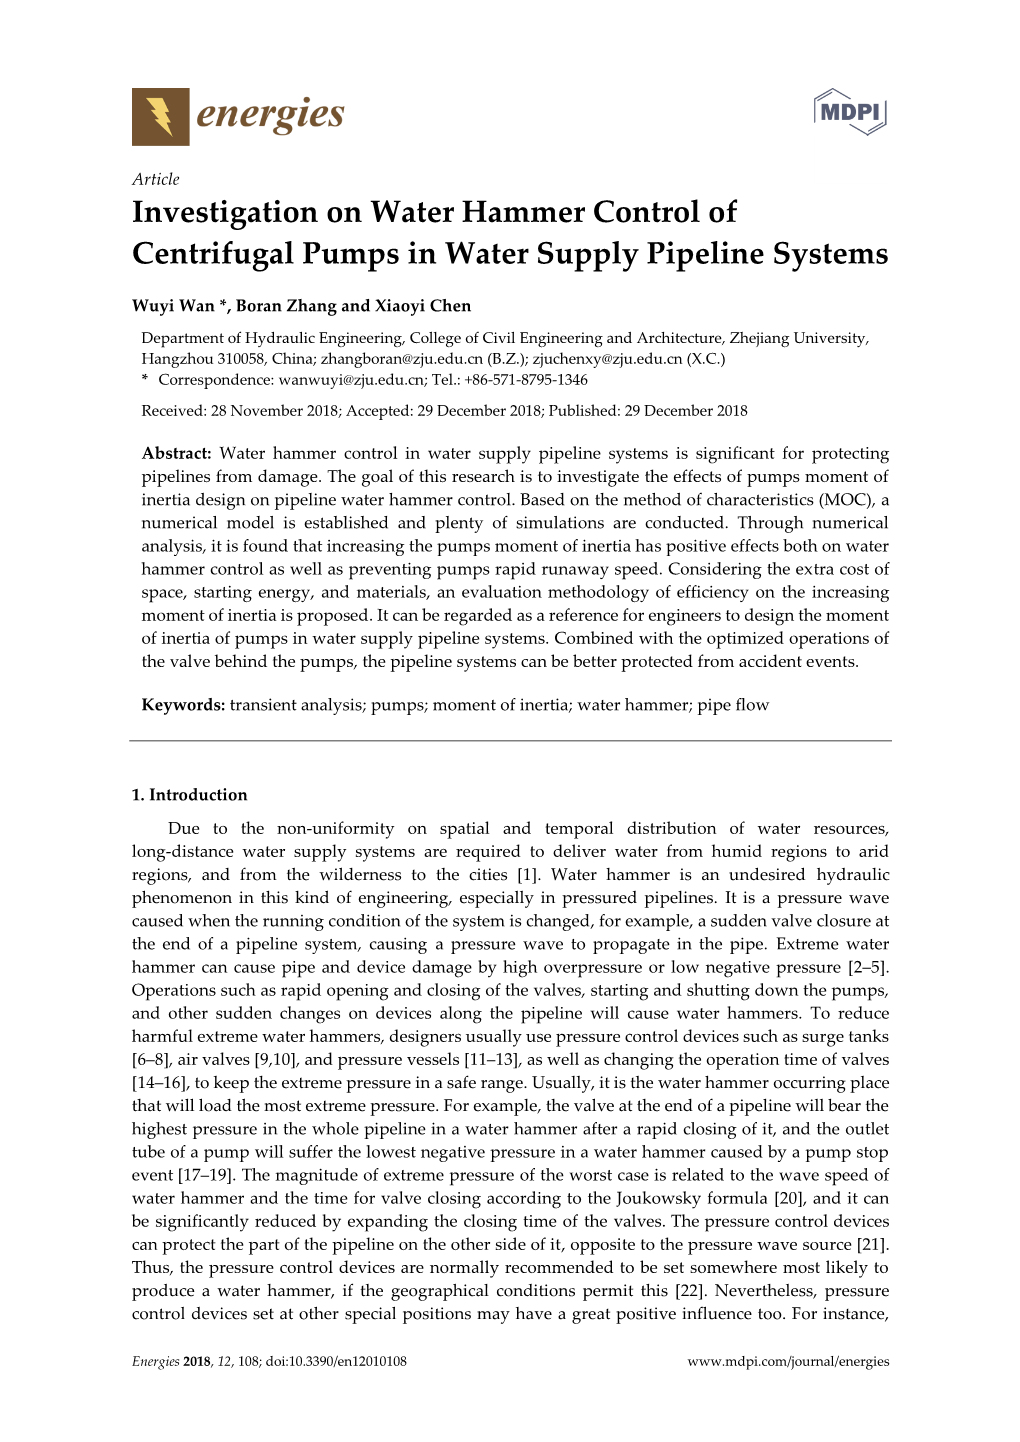 Investigation on Water Hammer Control of Centrifugal Pumps in Water Supply Pipeline Systems